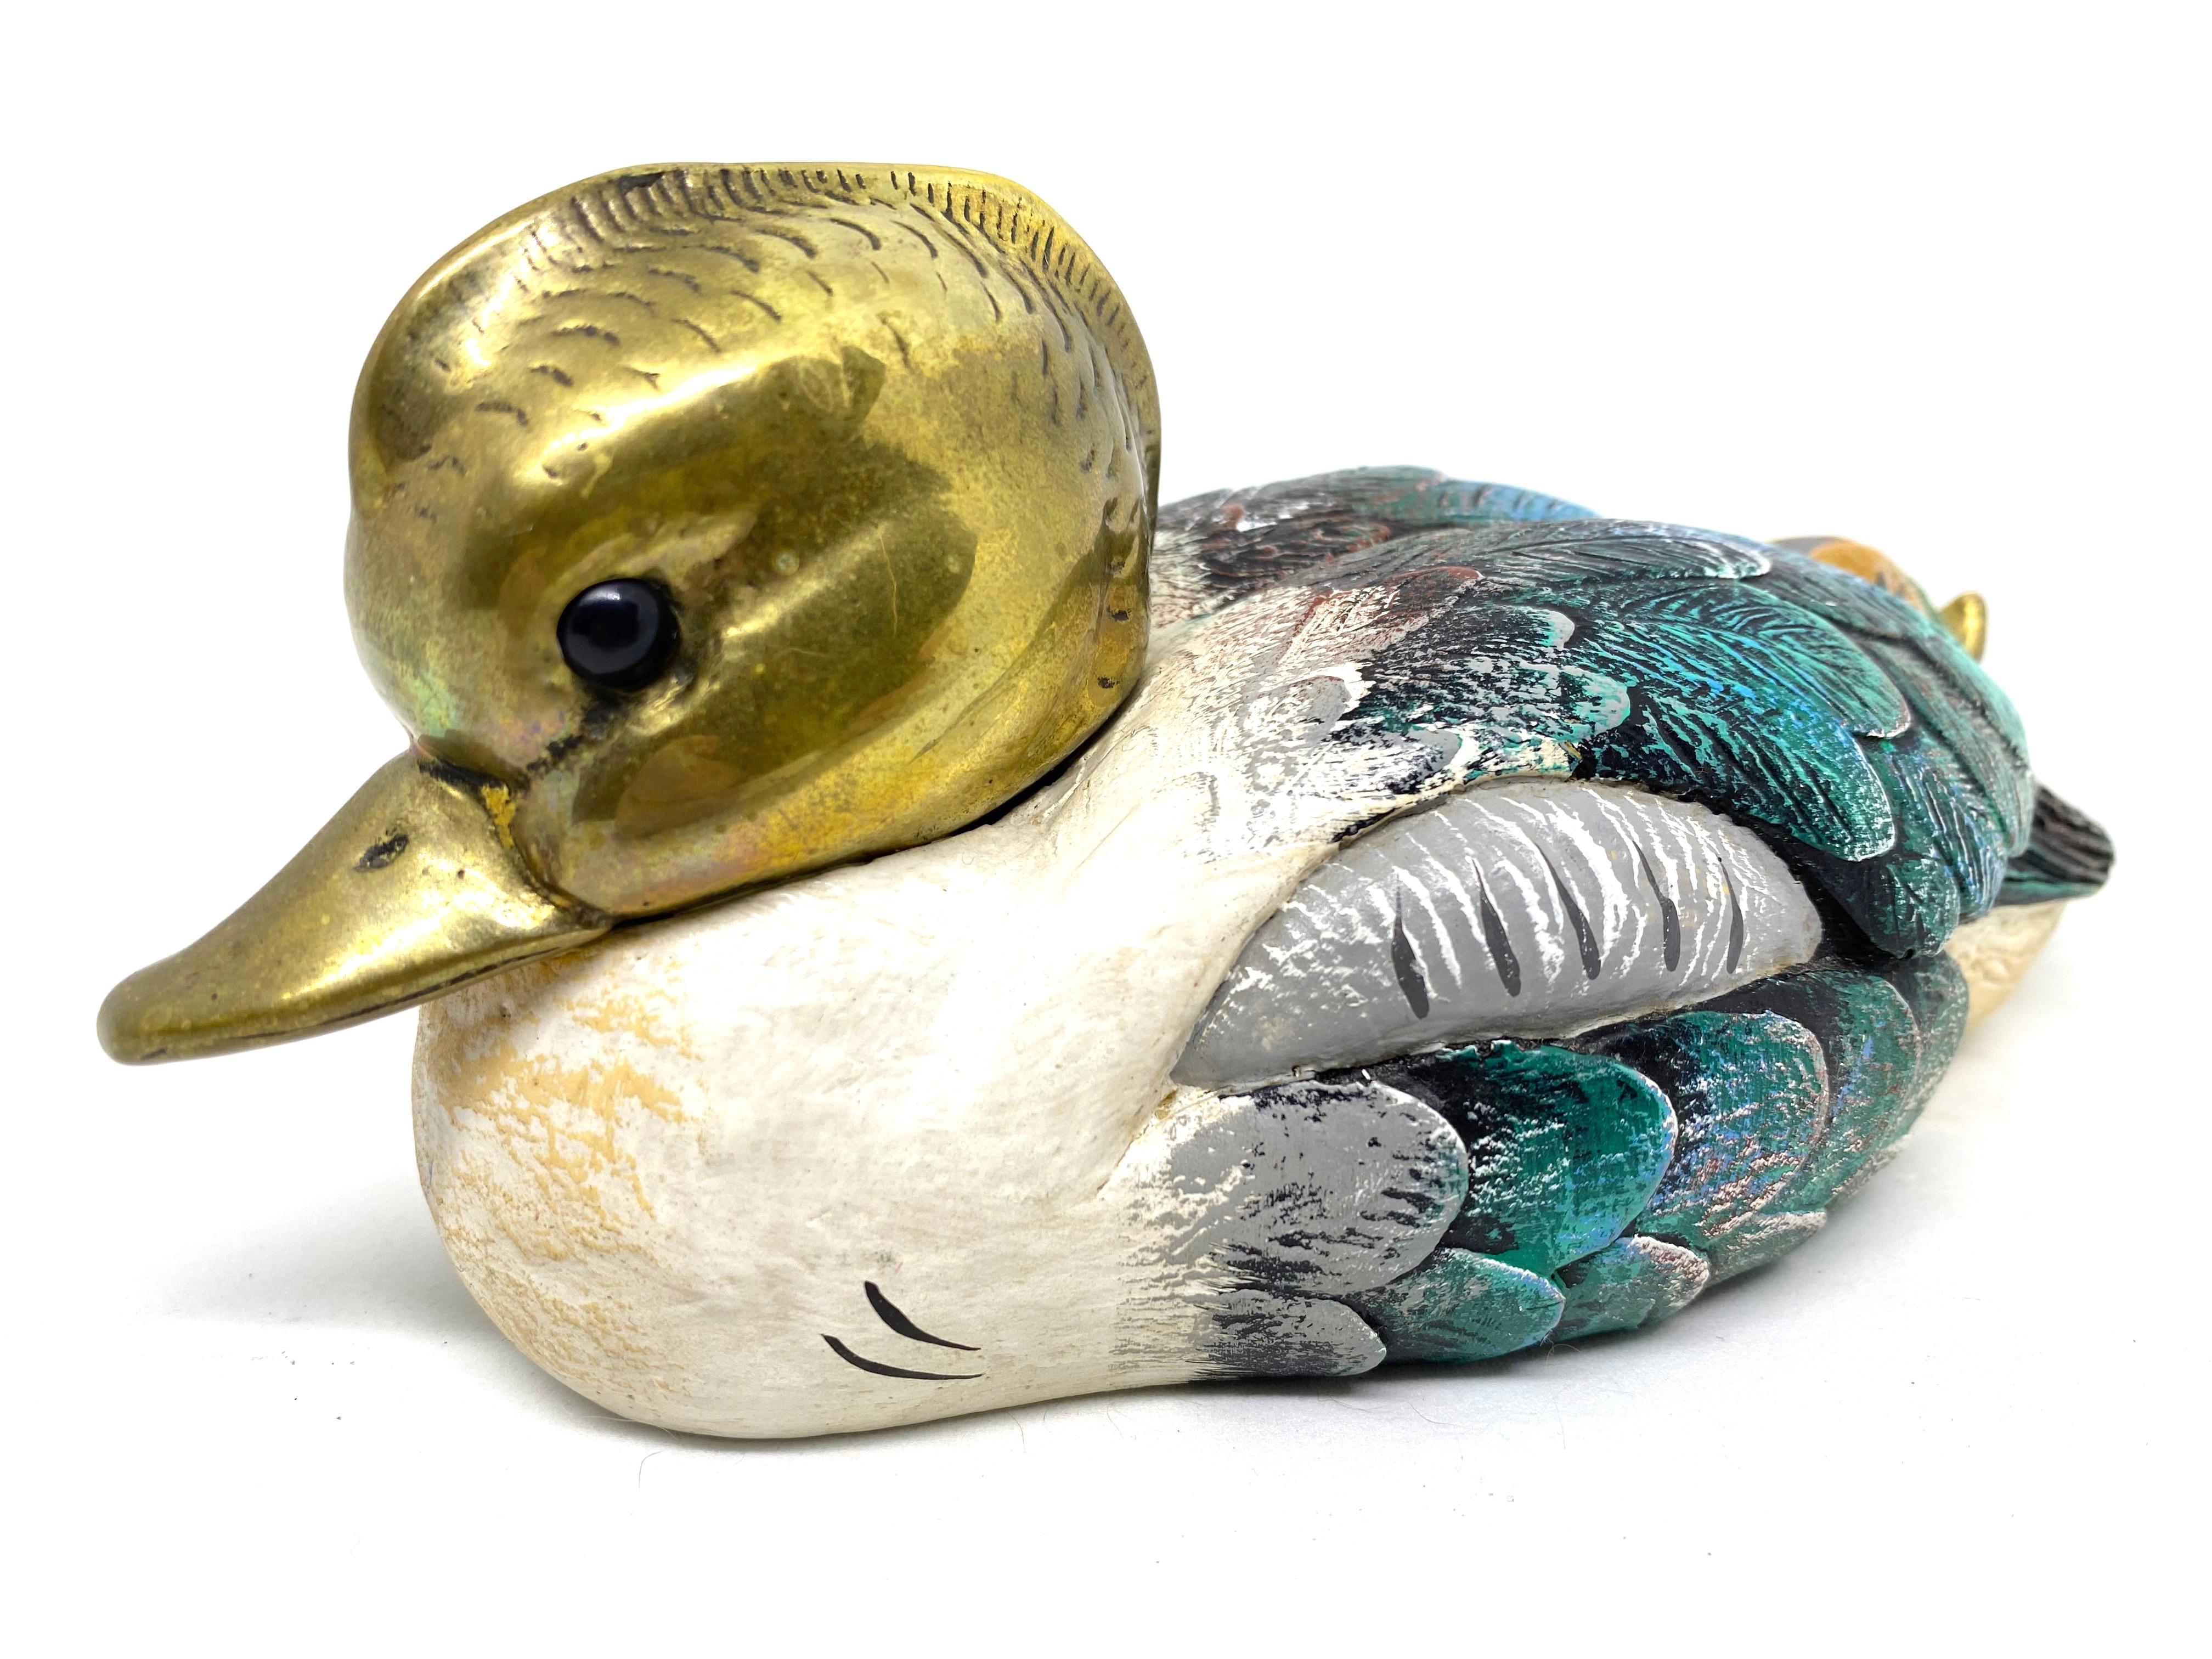 Vintage signed duck figurine by Elli Malevolti. It features a decoy type design with brass accented parts. It has glass eyes and a hand painted body. A nice addition to the Hollywood Regency interior. Signed Malevolti, Italy.